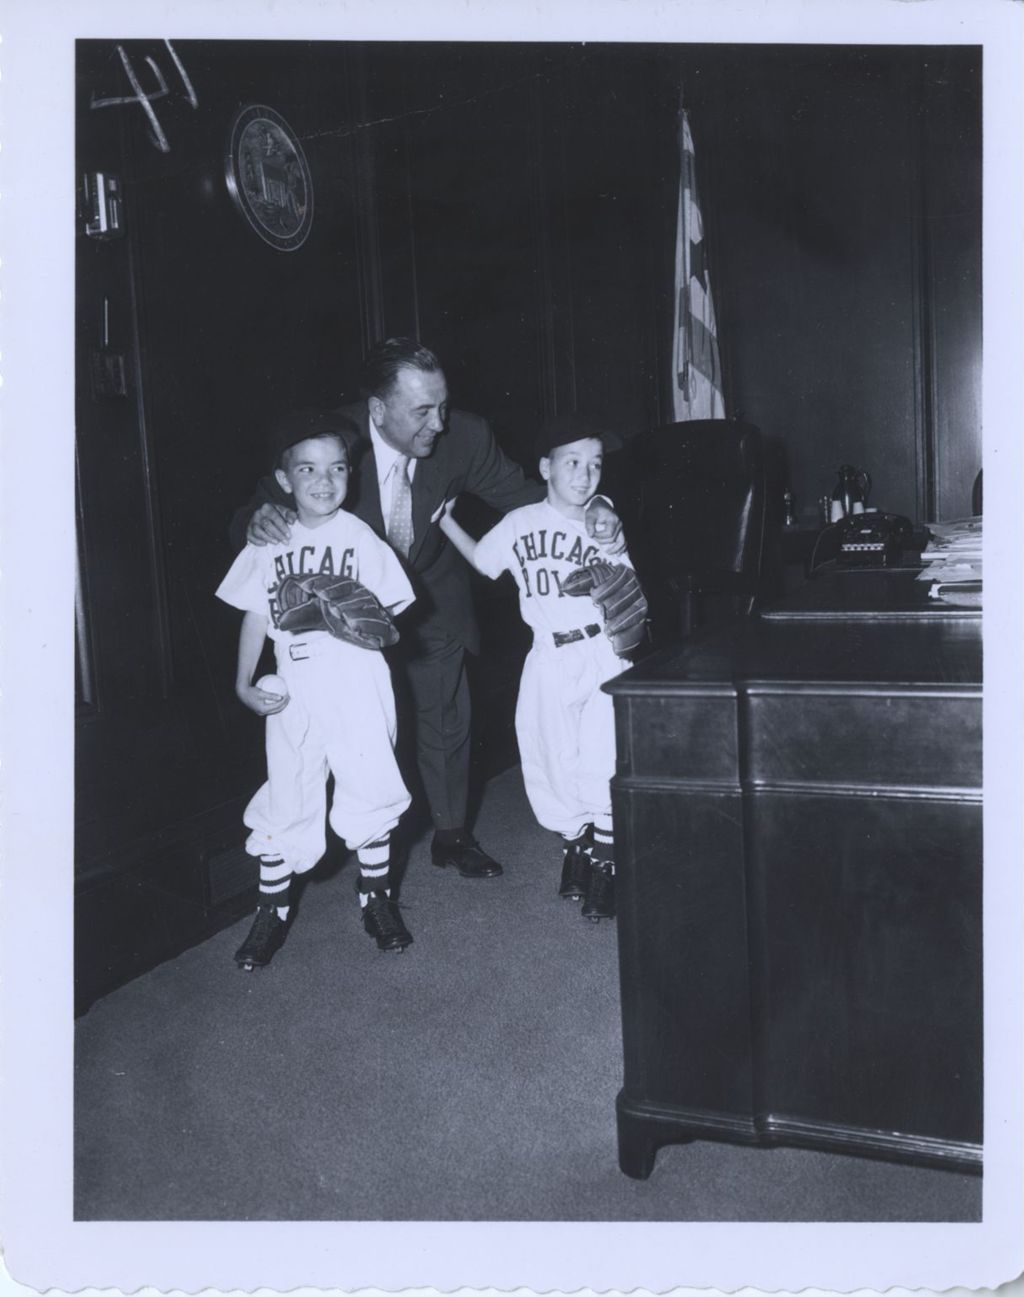 Miniature of Richard J. Daley with his sons in Chicago Police baseball uniforms